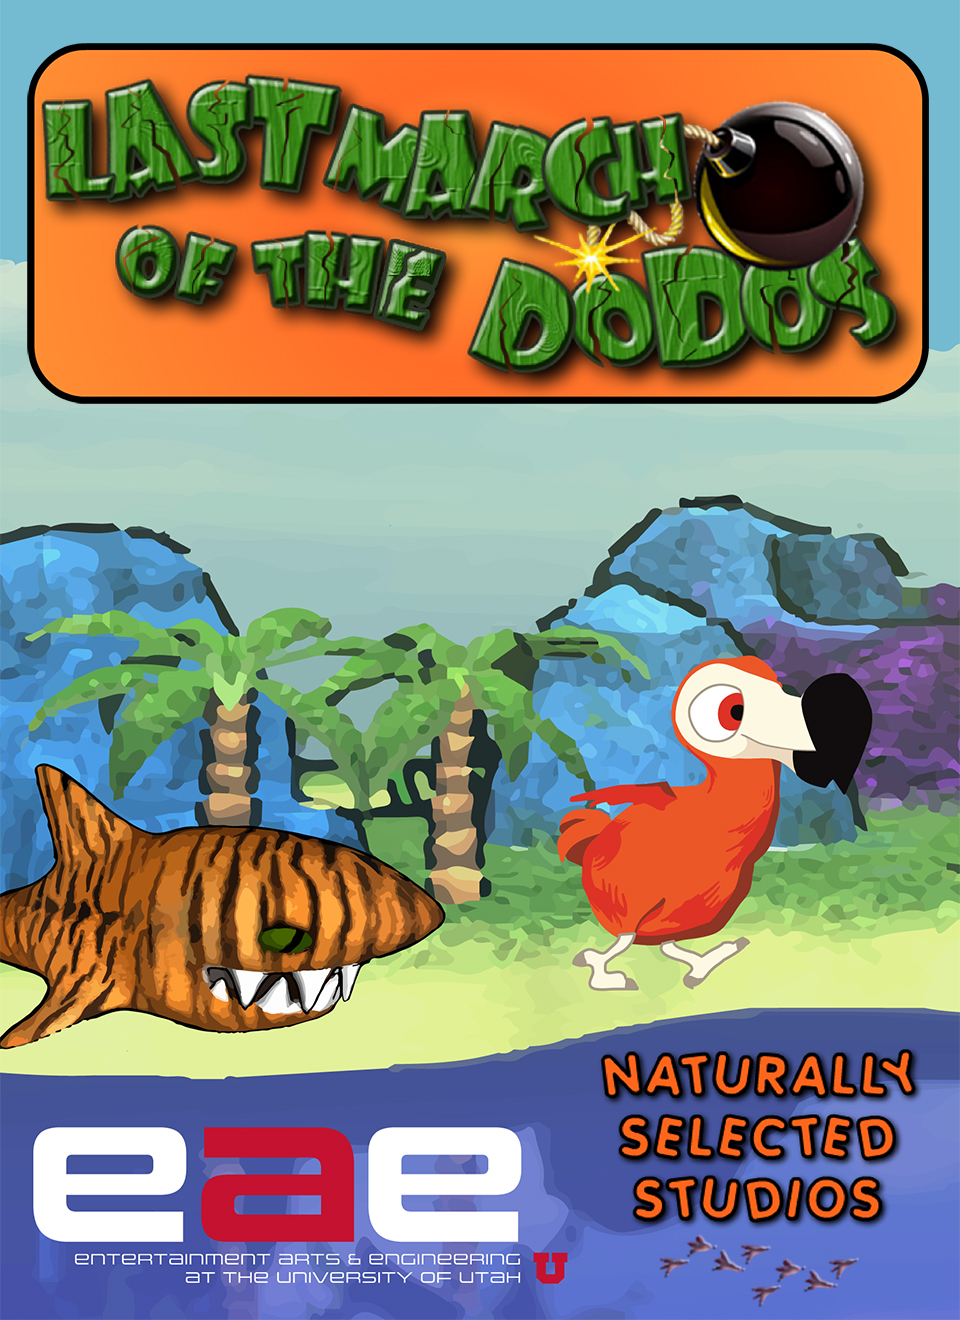 “Last March of the Dodos” is a video game developed by several graduate students in the U’s Entertainment Arts and Engineering program. It will be available Friday, Dec. 13, through Desura.com